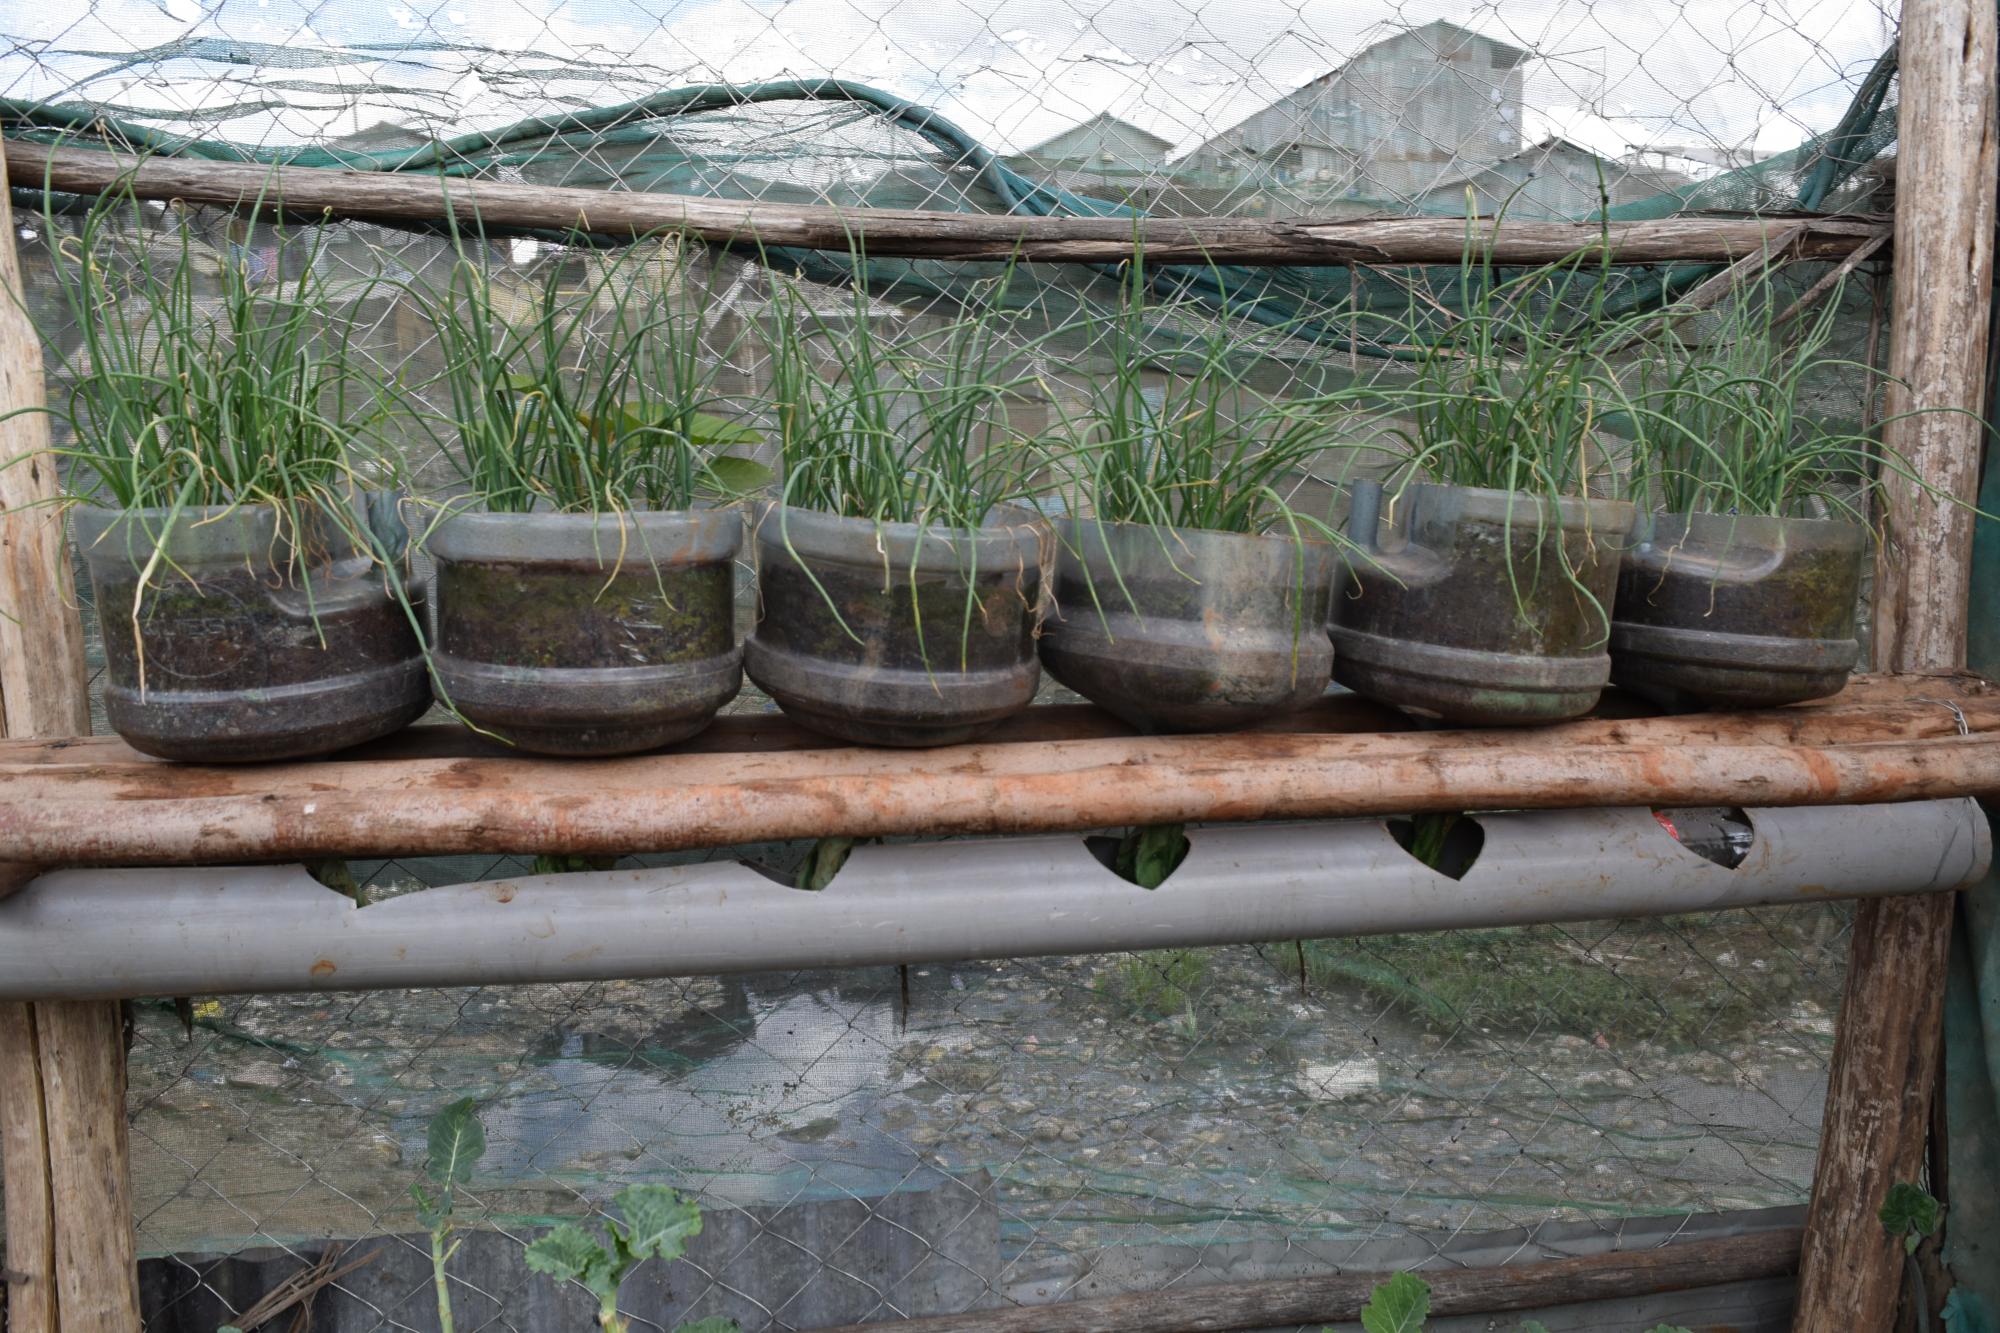 Photo 8: Onions planted in reused plastic containers (20 litres drinking water plastic bottles cut into half).